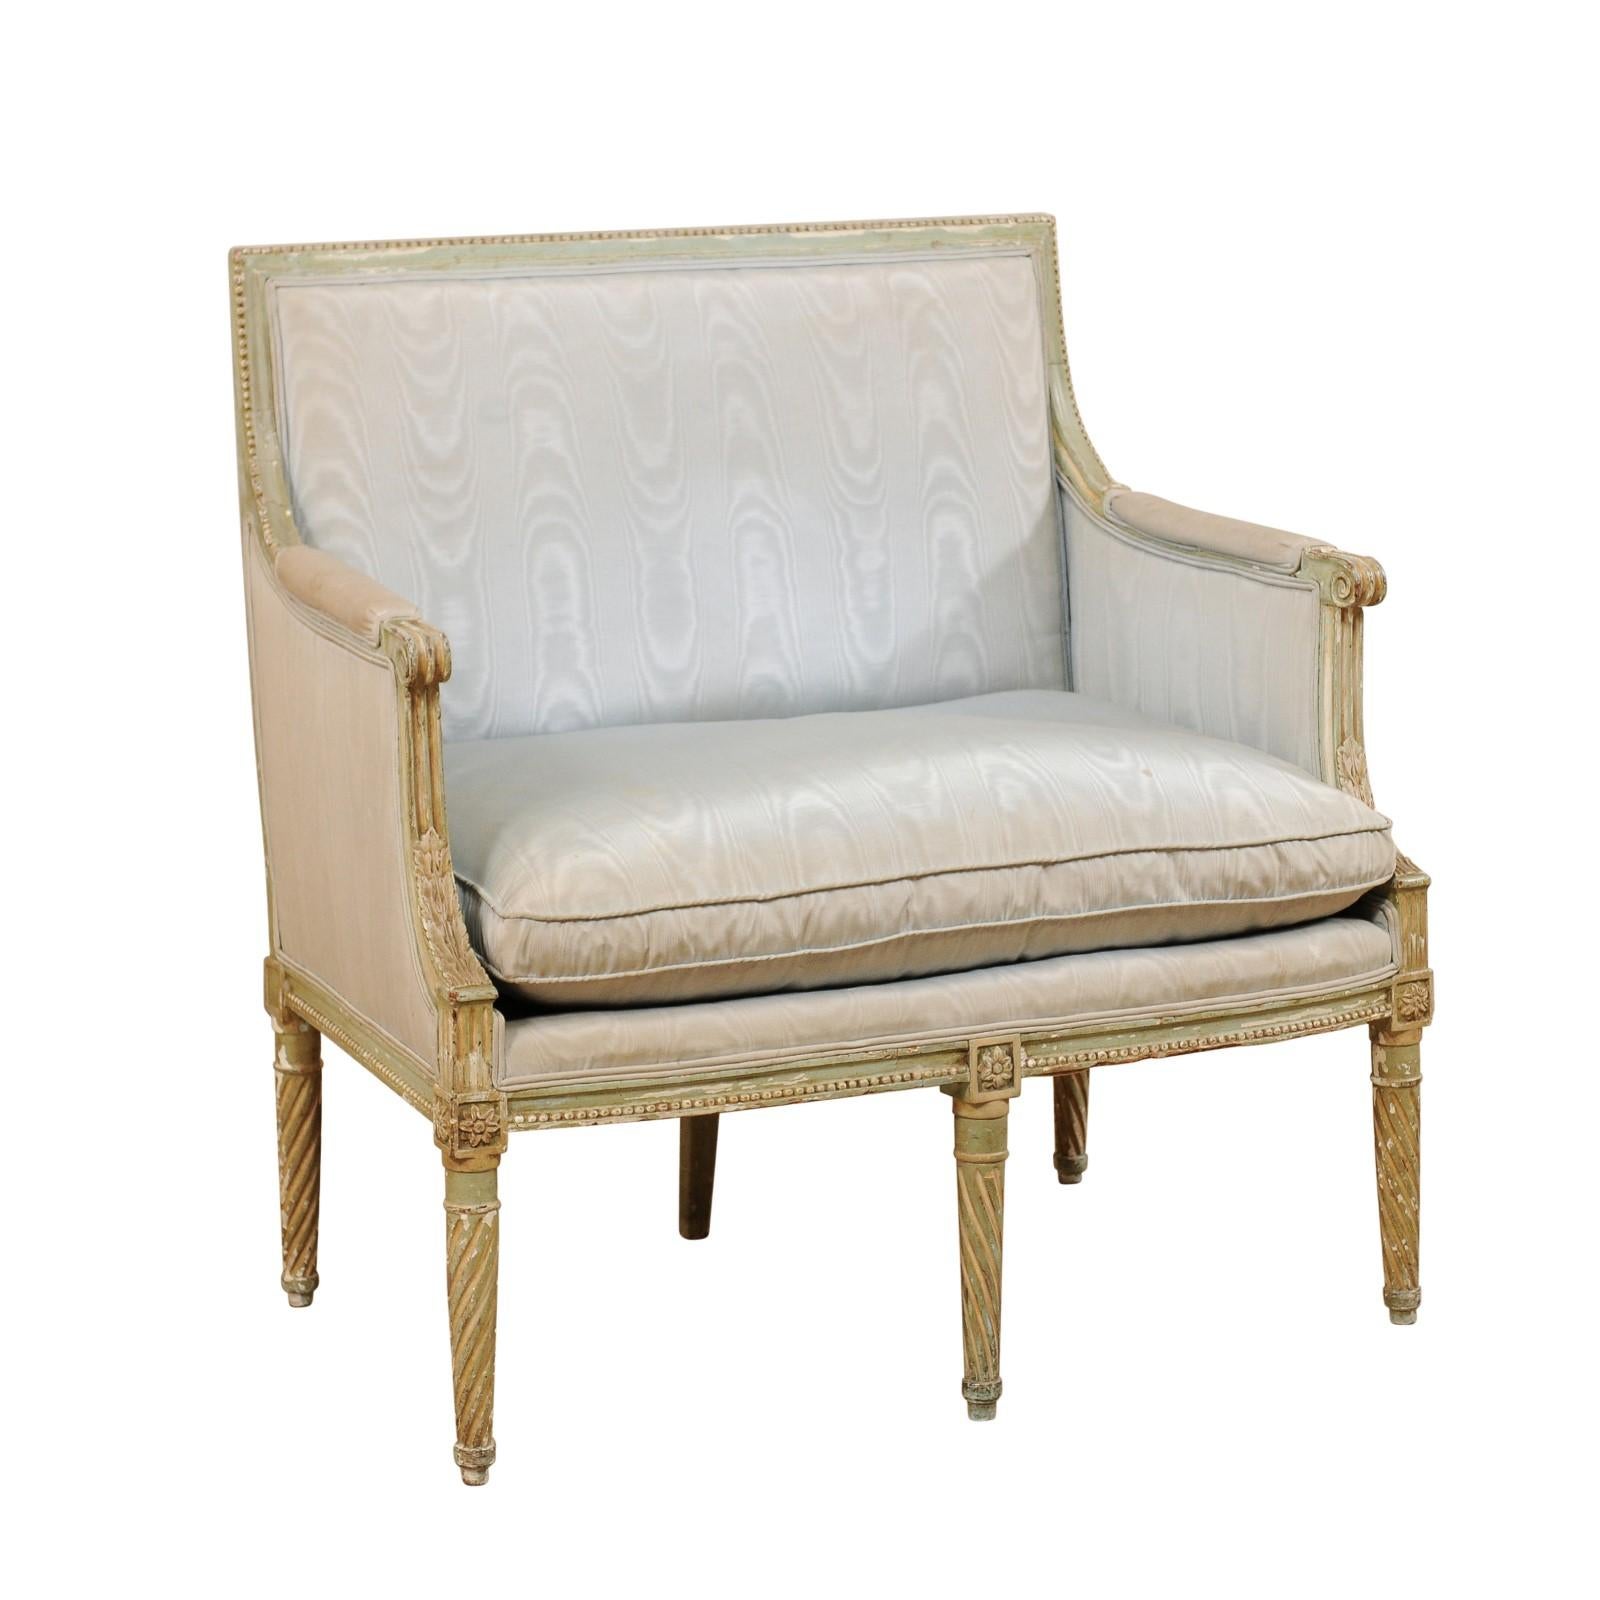 French Late 19th Century Louis XVI Style Marquise Armchair